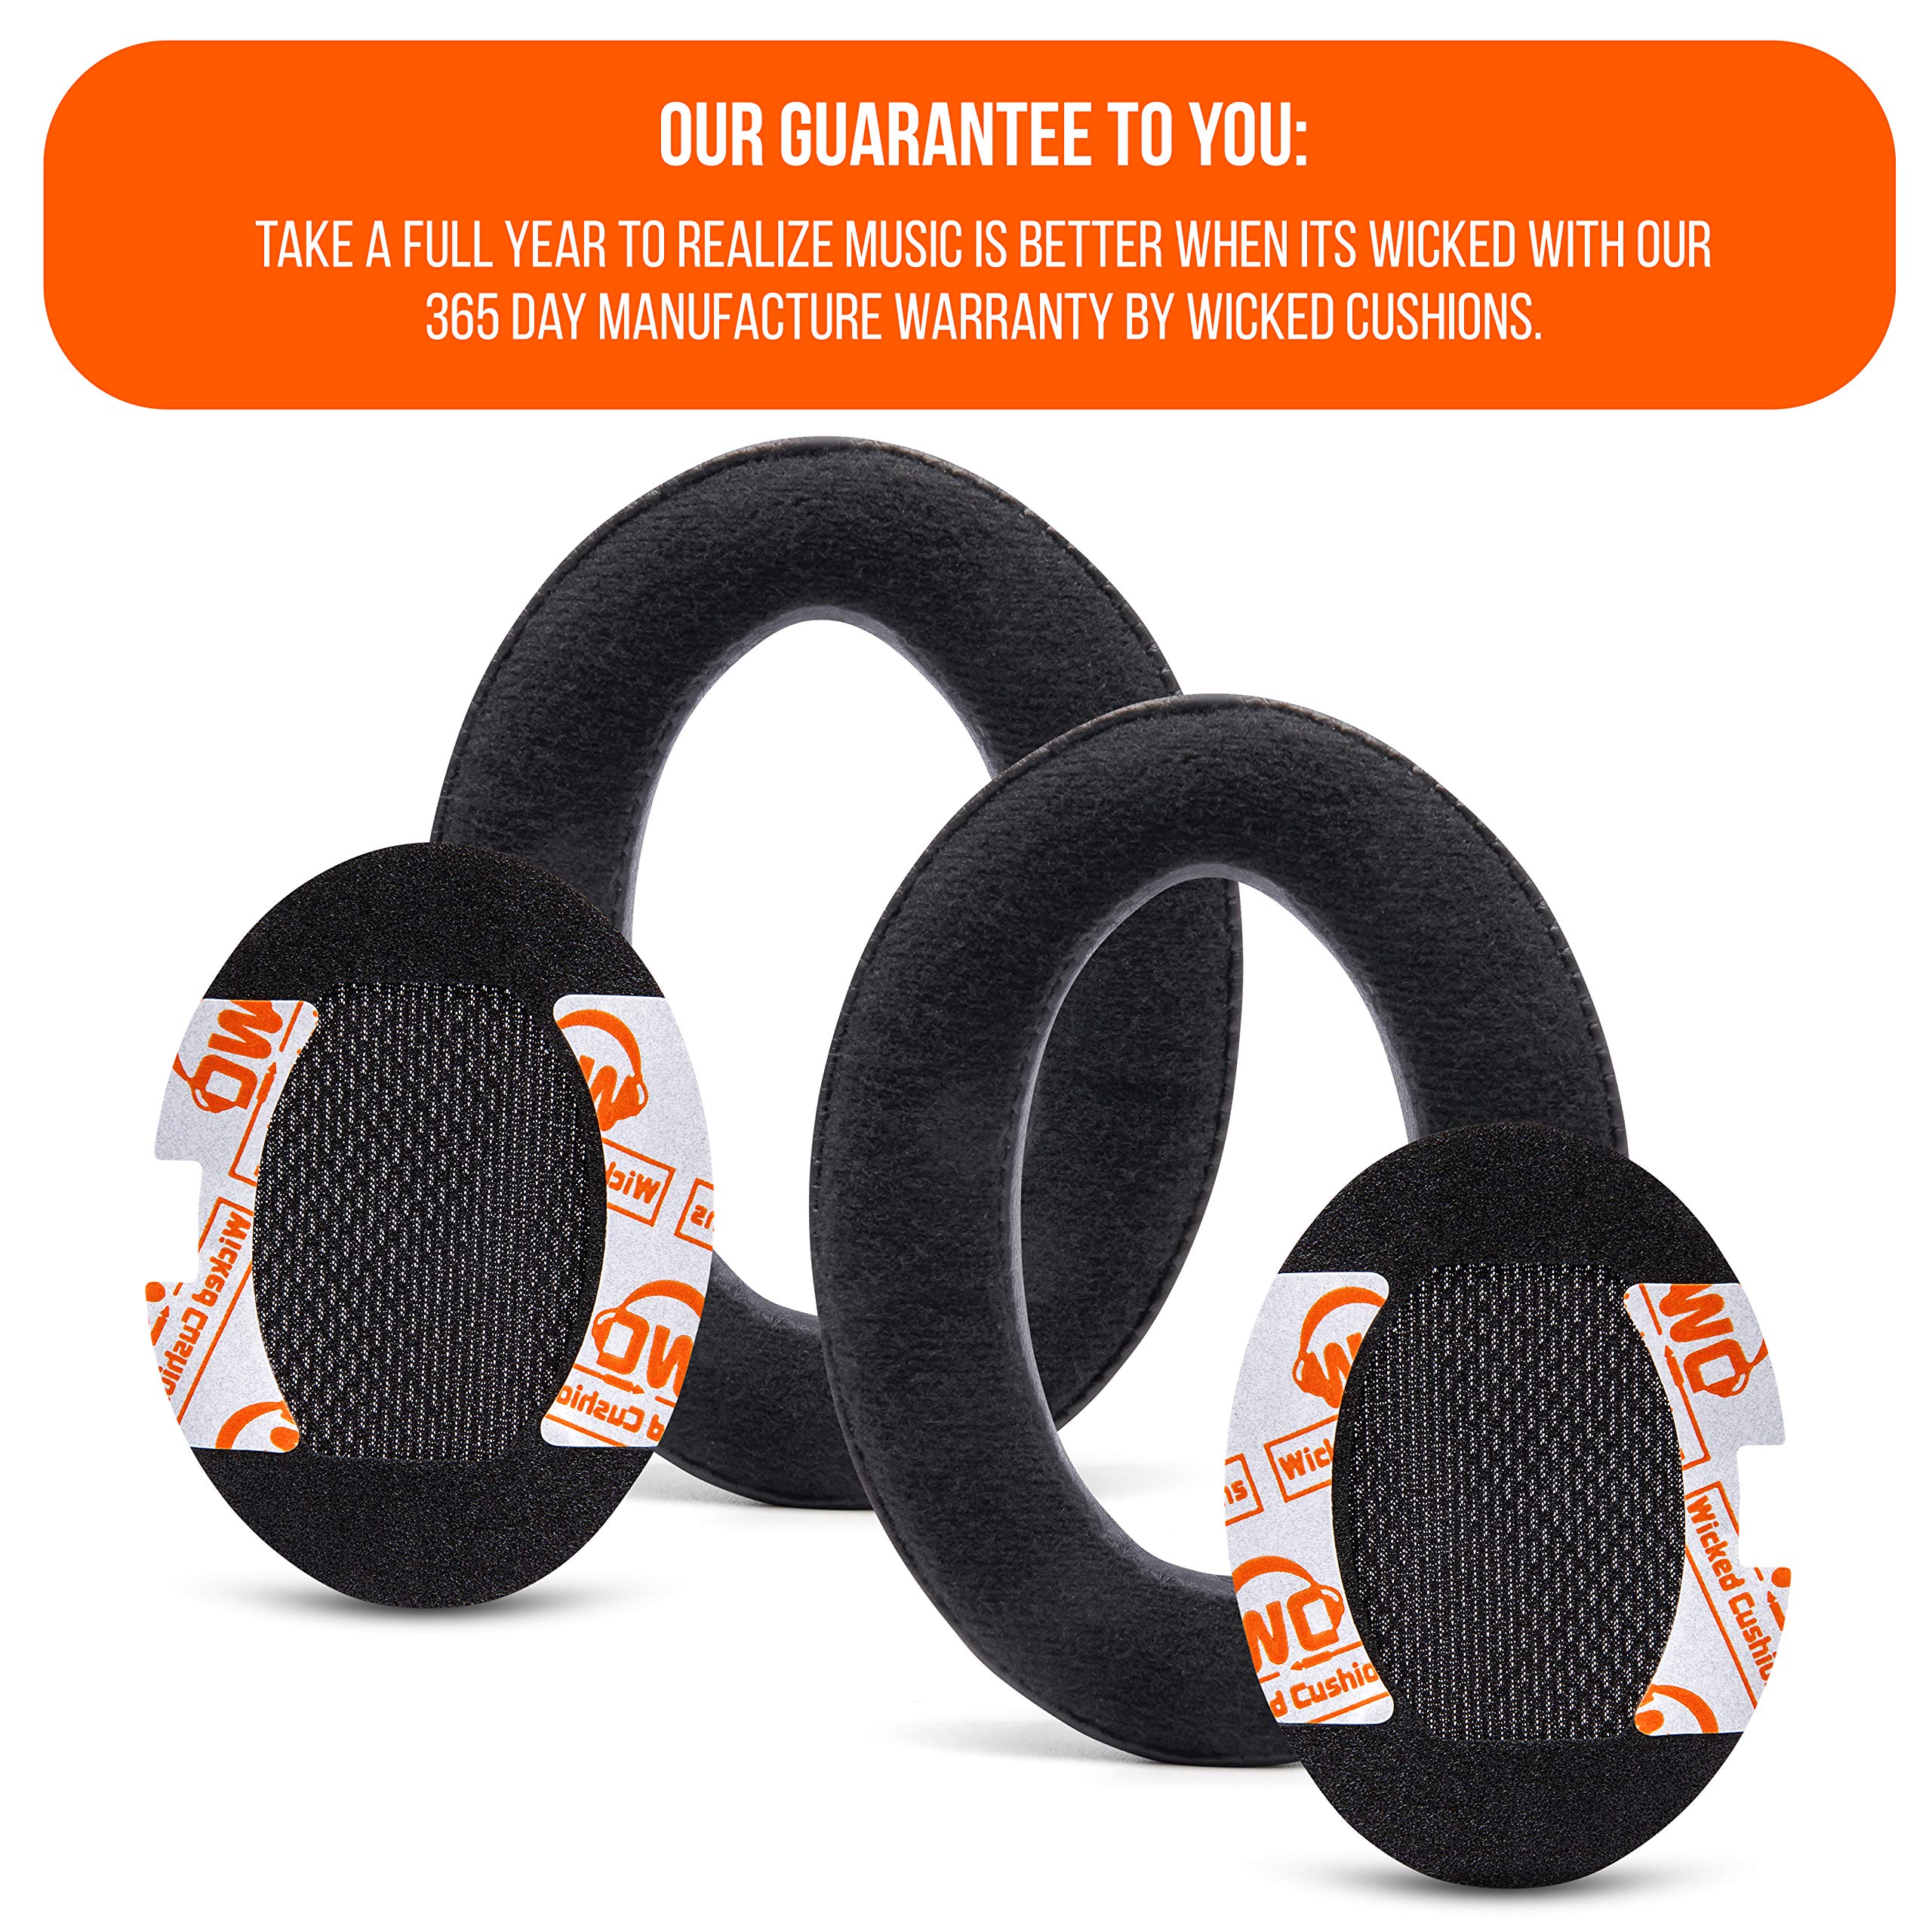 WC Upgraded Replacement Ear Pads for Bose QC15 Headphones Made by Wicked Cushions- Supreme Comfort - Compatible with QC25 / QC2 / AE2 / AE2i / AE2W - Extra Durable | (Velour)